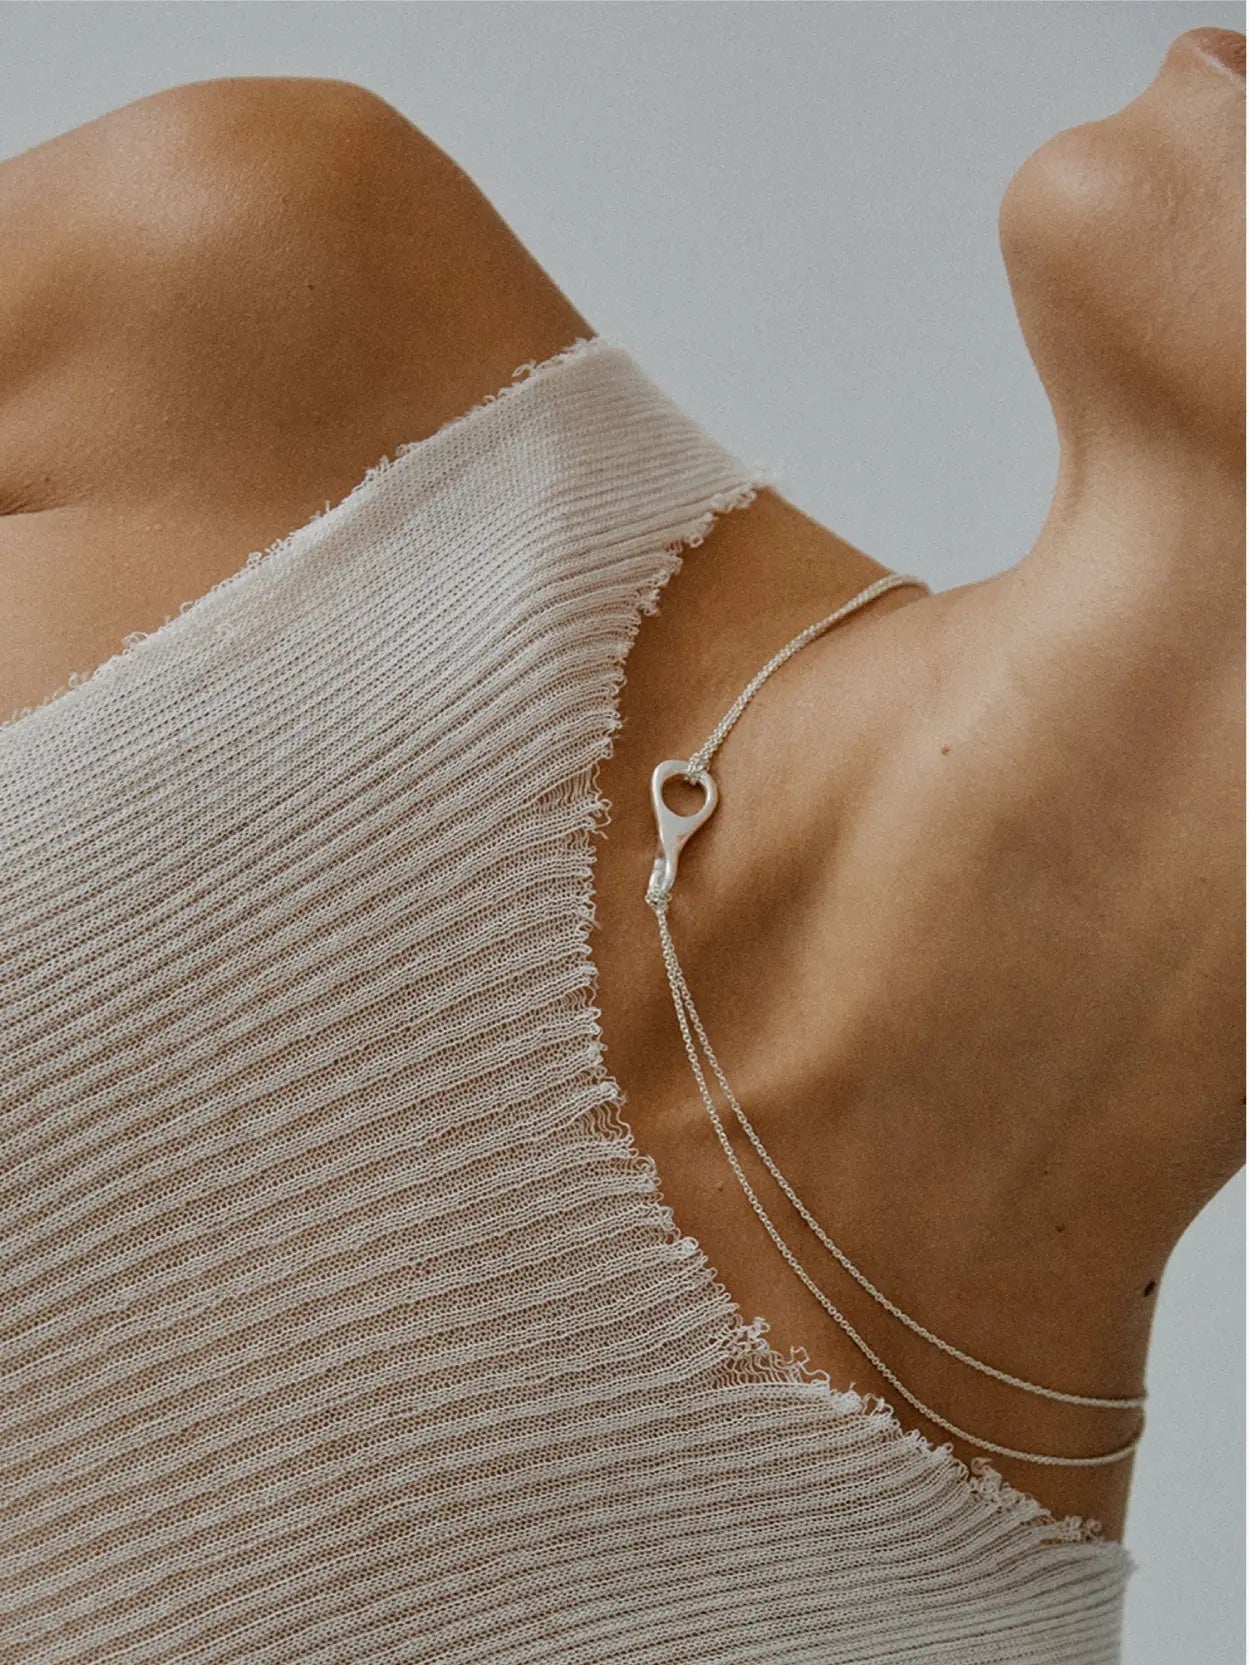 A delicate Mel Double Chain Necklace from Nathalie Schreckenberg, featuring a small, intricately designed clasp, is shown against a plain white background. The thin chain forms a slight curve, highlighting its simplicity and elegance.